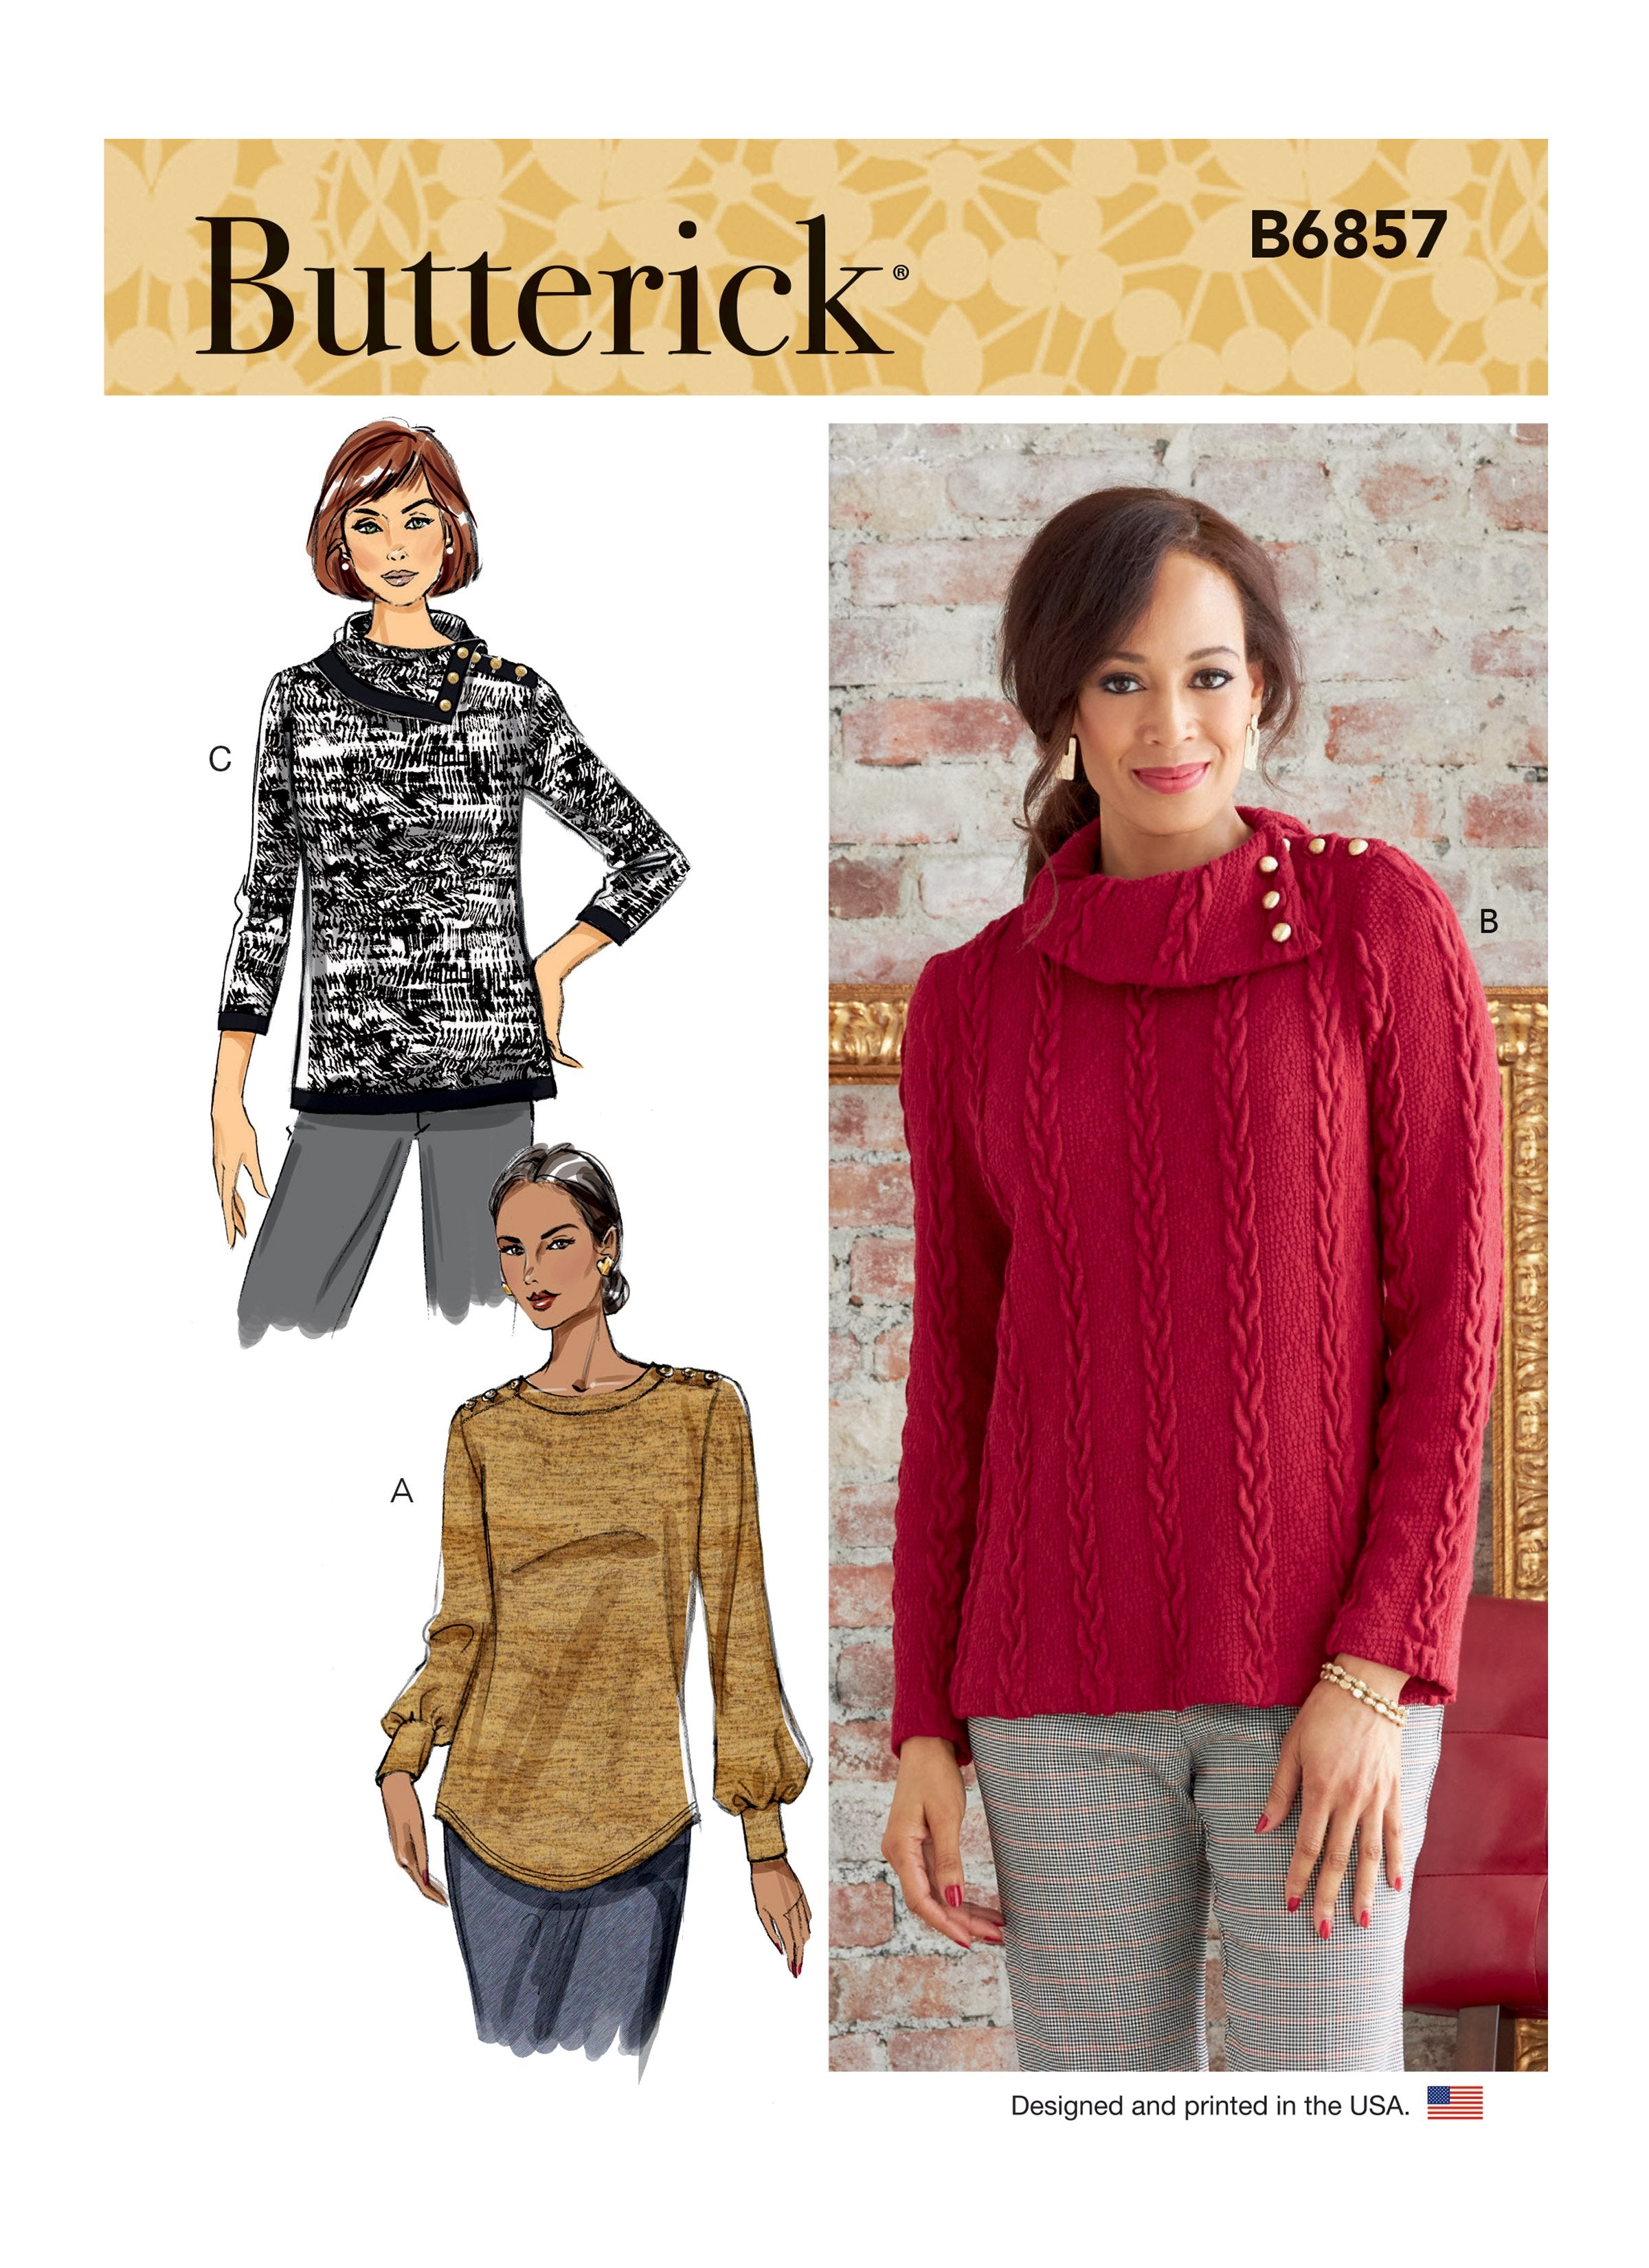 Butterick sewing pattern 6857 Misses' Top from Jaycotts Sewing Supplies